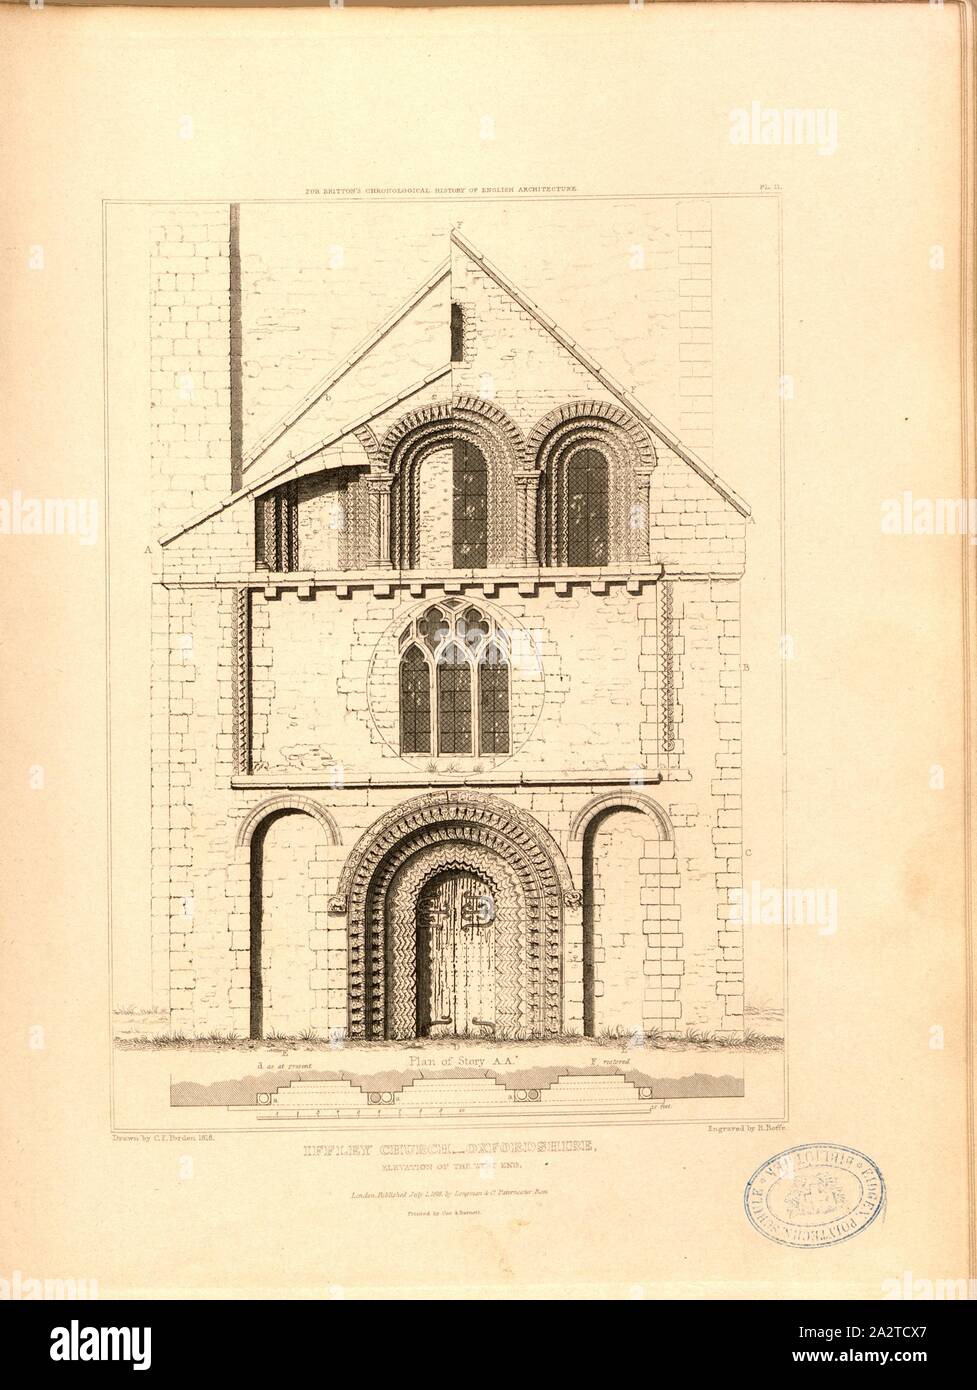 Iffley Church, Oxfordshire, elevation of the west end, Elevation of St Mary's Church at Iffley in Oxfordshire, signed: Drawn by C.F. Porden; Engraved by R. Roffe; Published by Longman & Co, Fig. 9, Pl. II, after p. 260, Porden, C. F. (drawing); Roffe, Richard (engraving); Longman & Co. (published), 1818, John Britton: The architectural antiquities of Great Britain: represented and illustrated in a series of views, elevations, plans, sections and details of various ancient English edifices: with historical and descriptive accounts of each. Bd. 5. London: J. Taylor, 1807-1826 Stock Photo